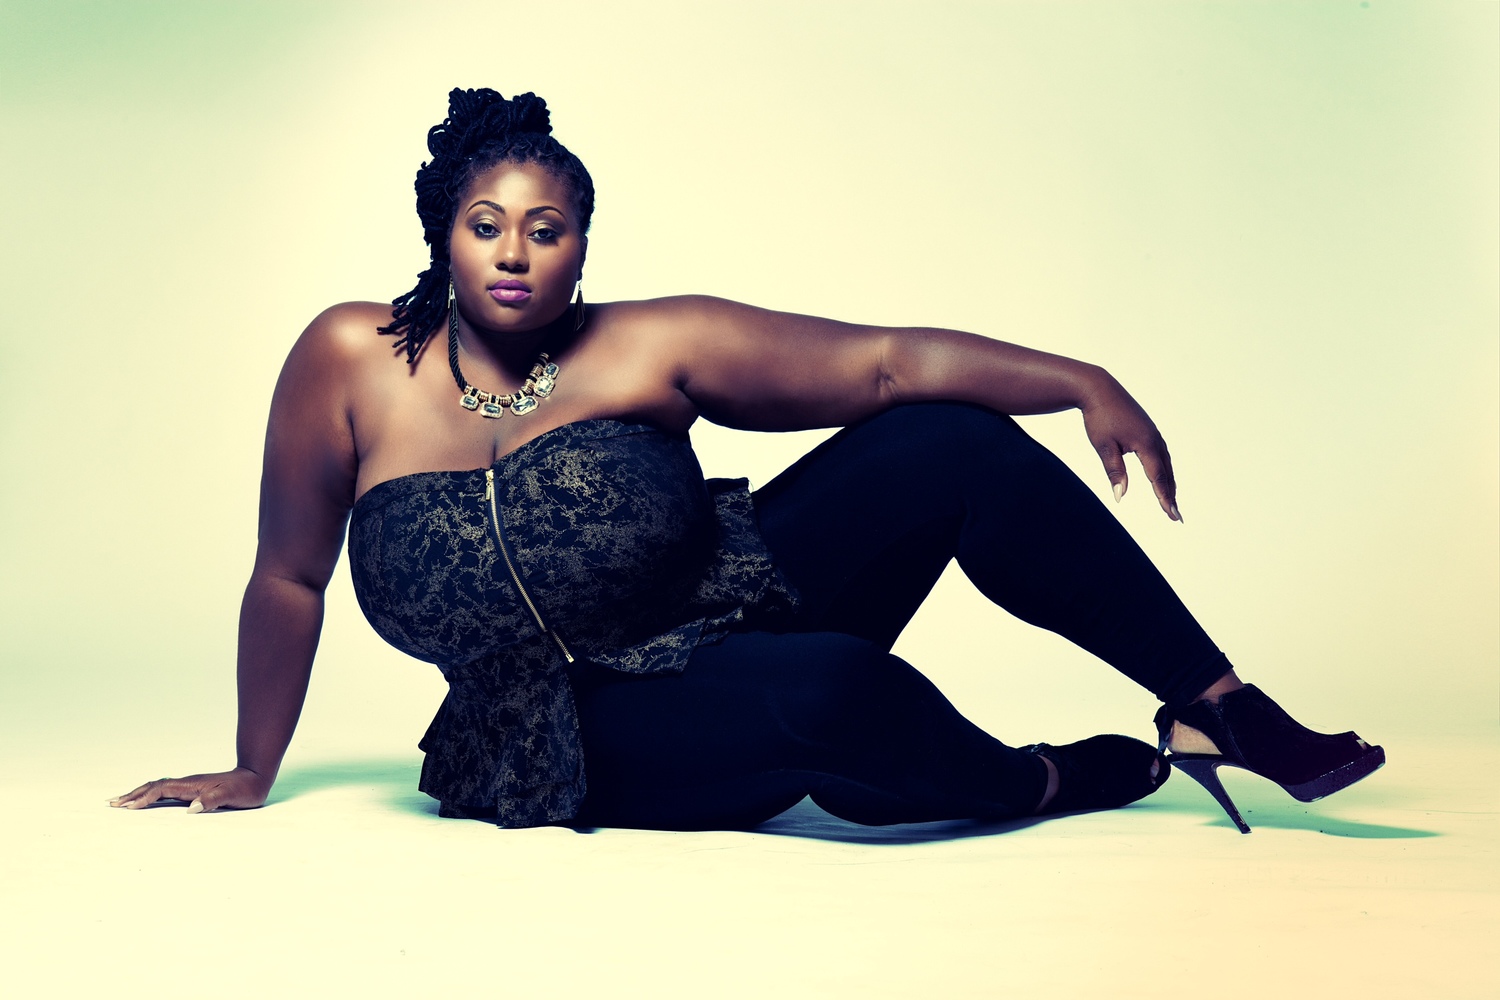 Jezra M Plus Size Model Advocate And Blogger Talks About Purebodylove Page 2 Of 4 Women